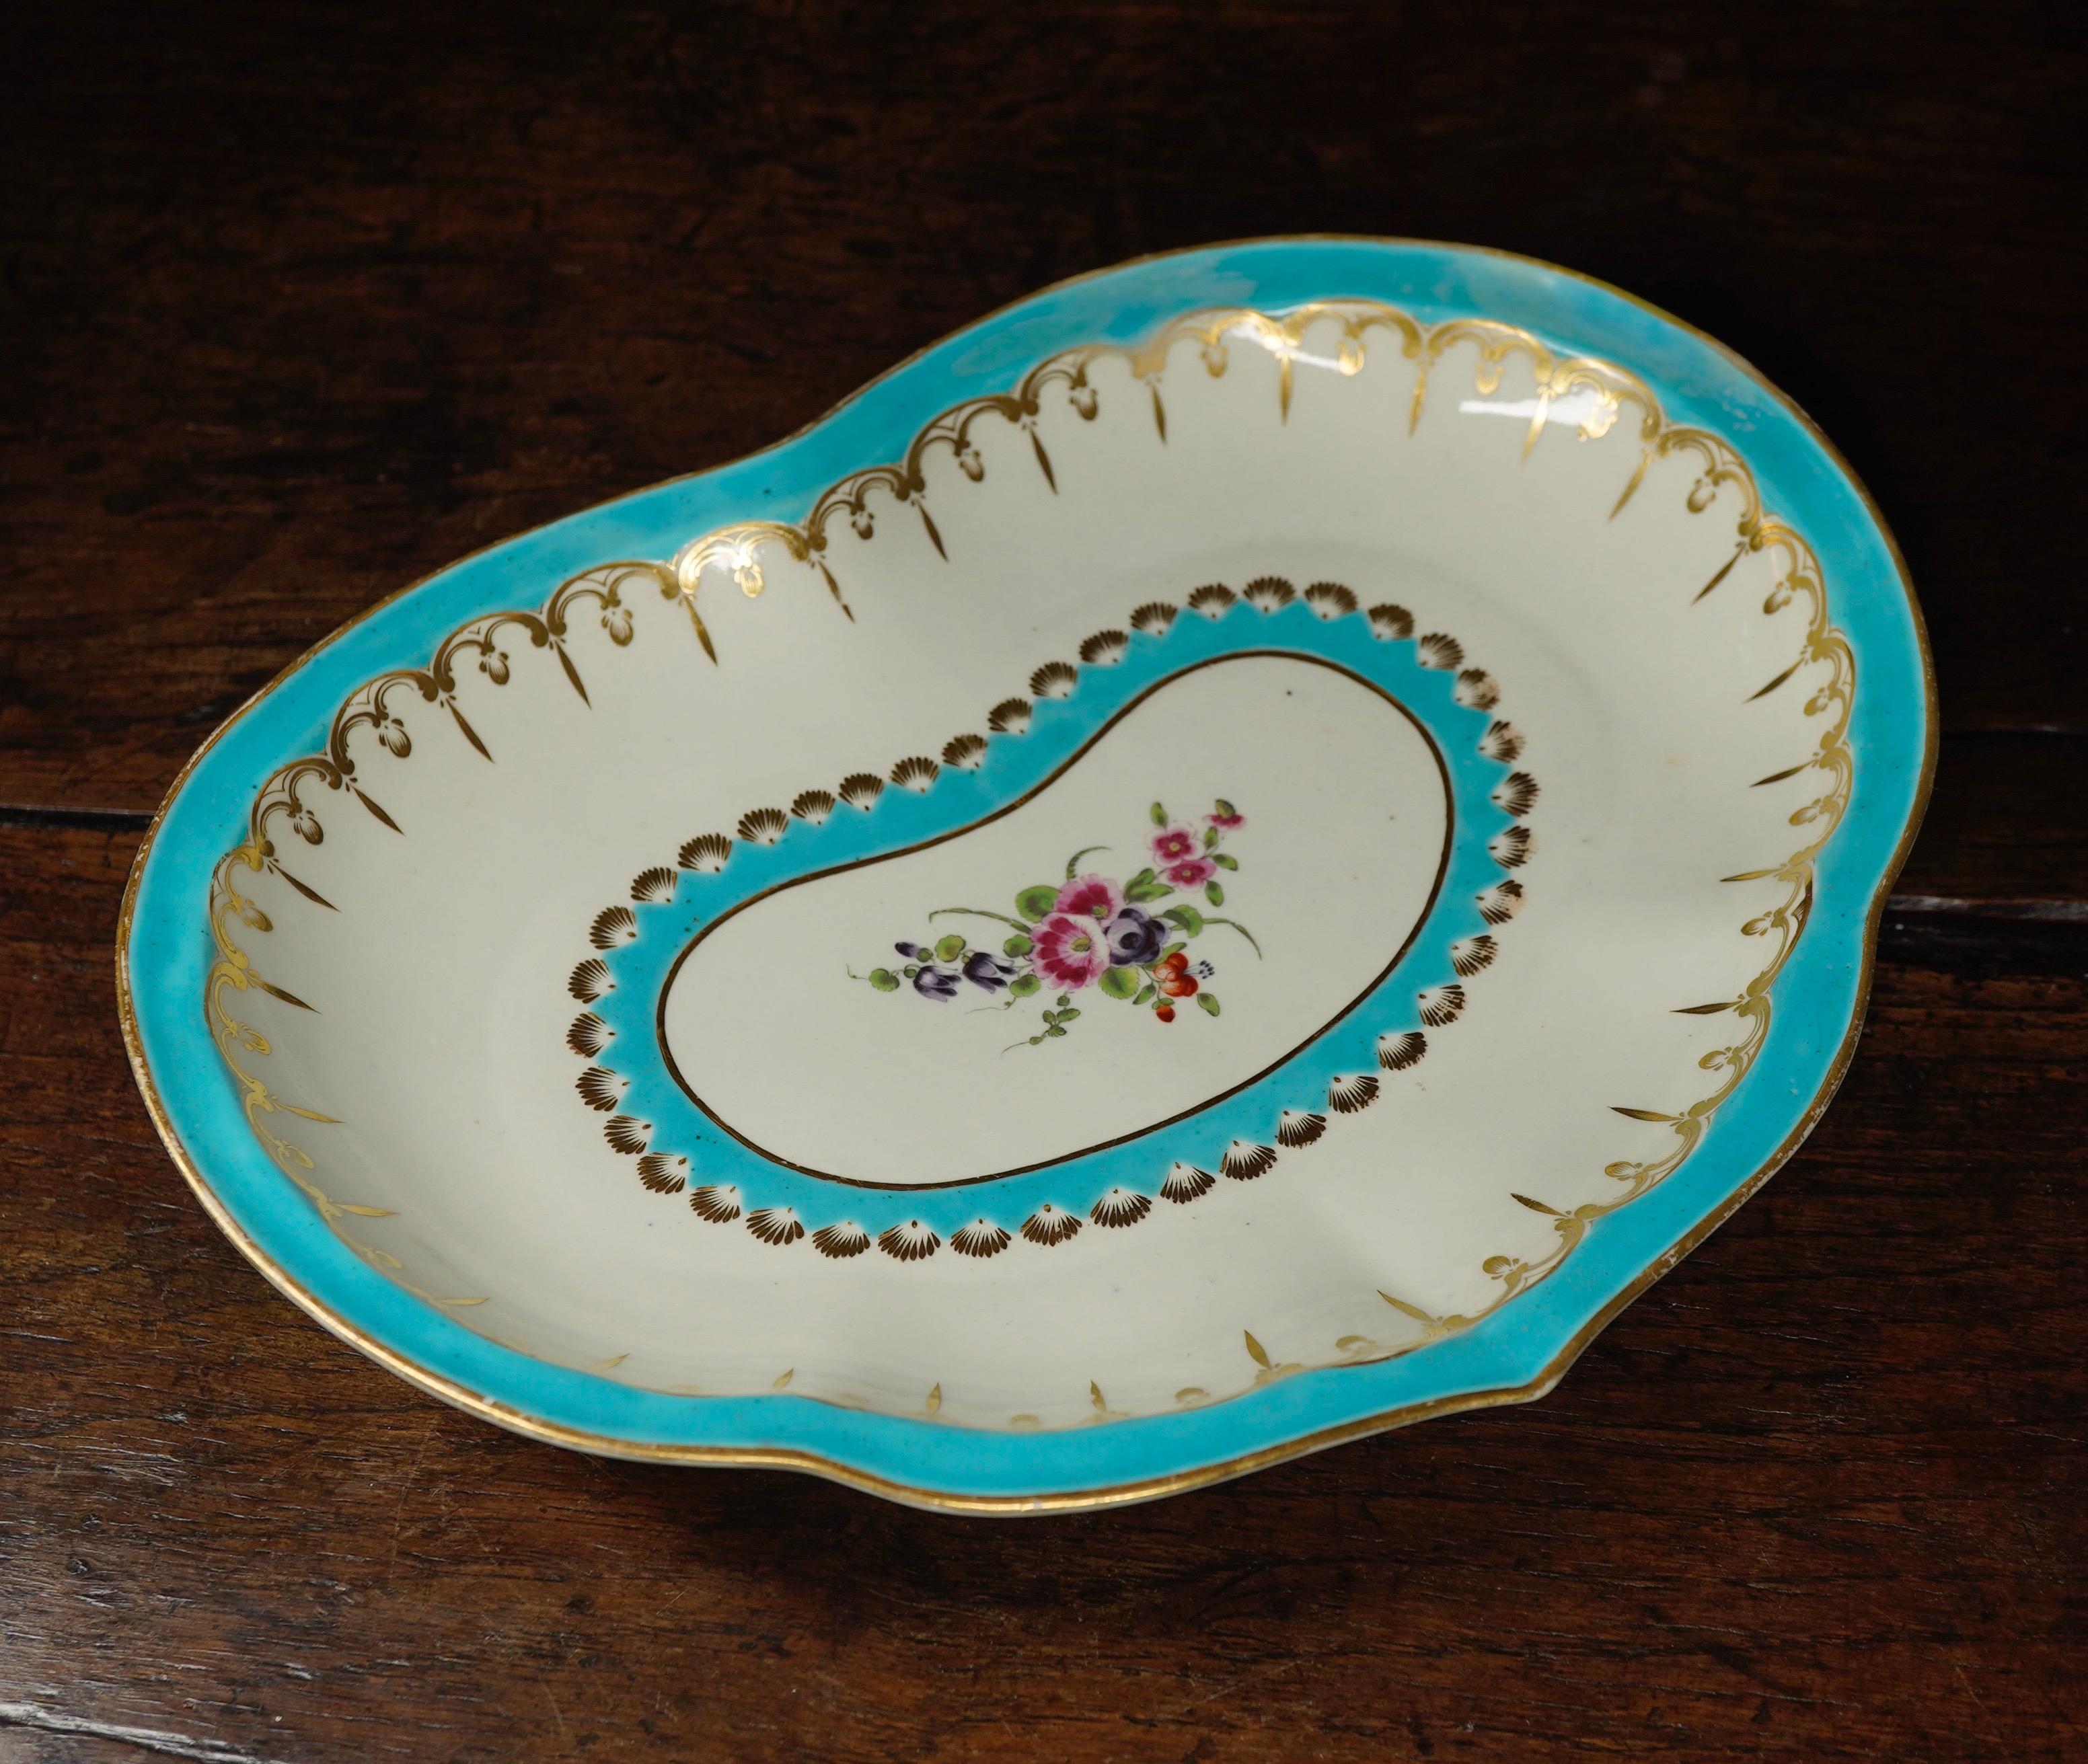 Dr Wall Worcester serving dish of heart shape, decorated with two bands of ‘sky blue’ borders with gilt scallops and pendants, around a central colourful flower group.
Unmarked,
circa 1770.